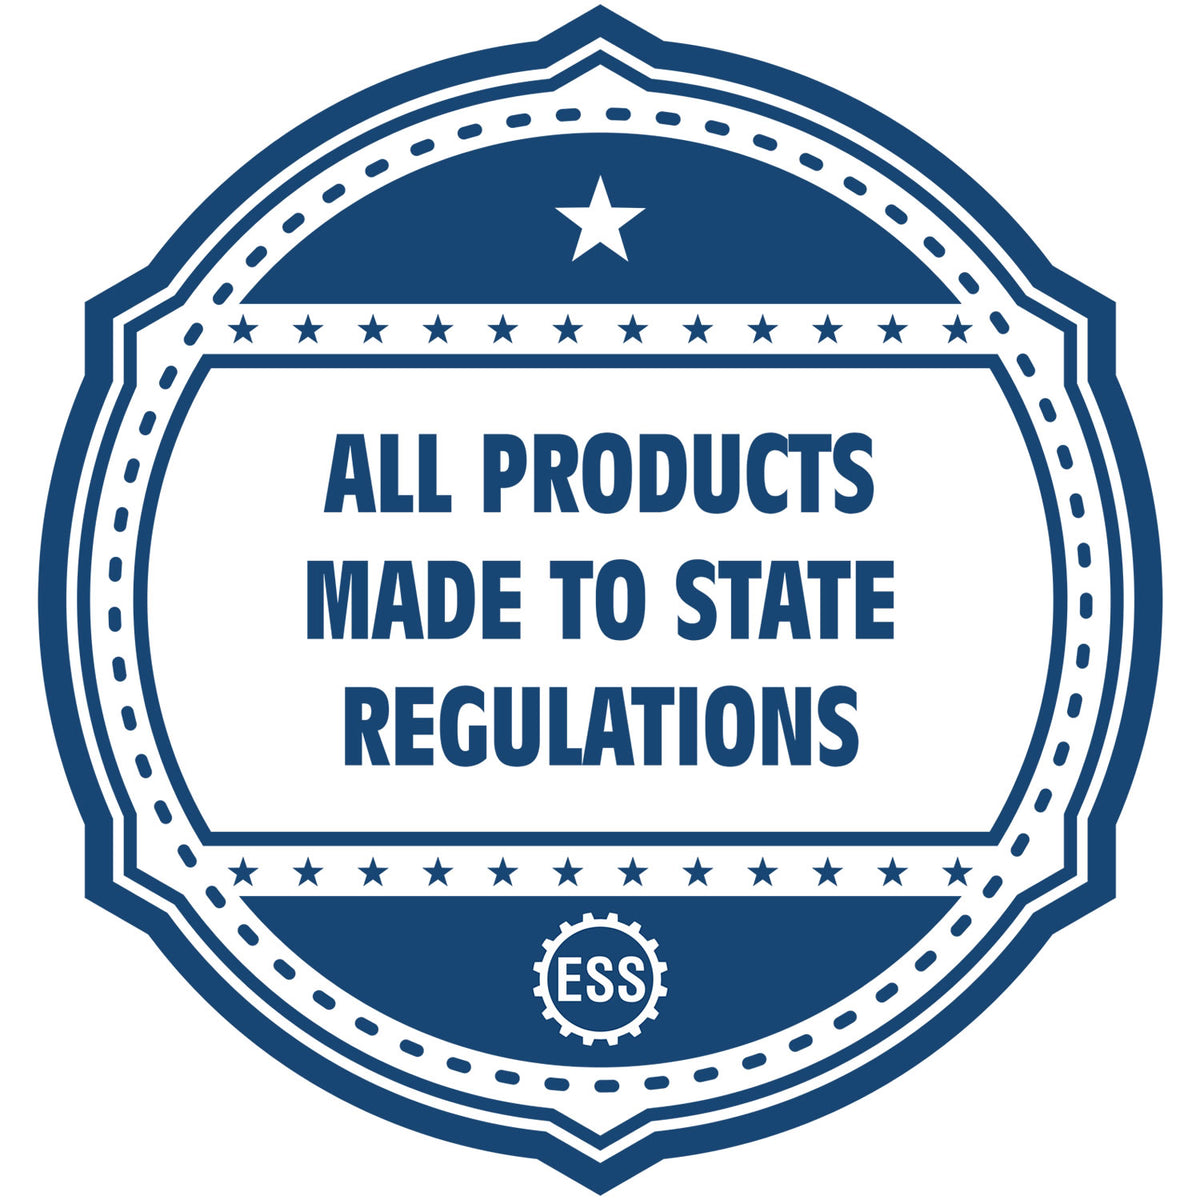 An icon or badge element for the Wooden Handle Florida Rectangular Notary Public Stamp showing that this product is made in compliance with state regulations.